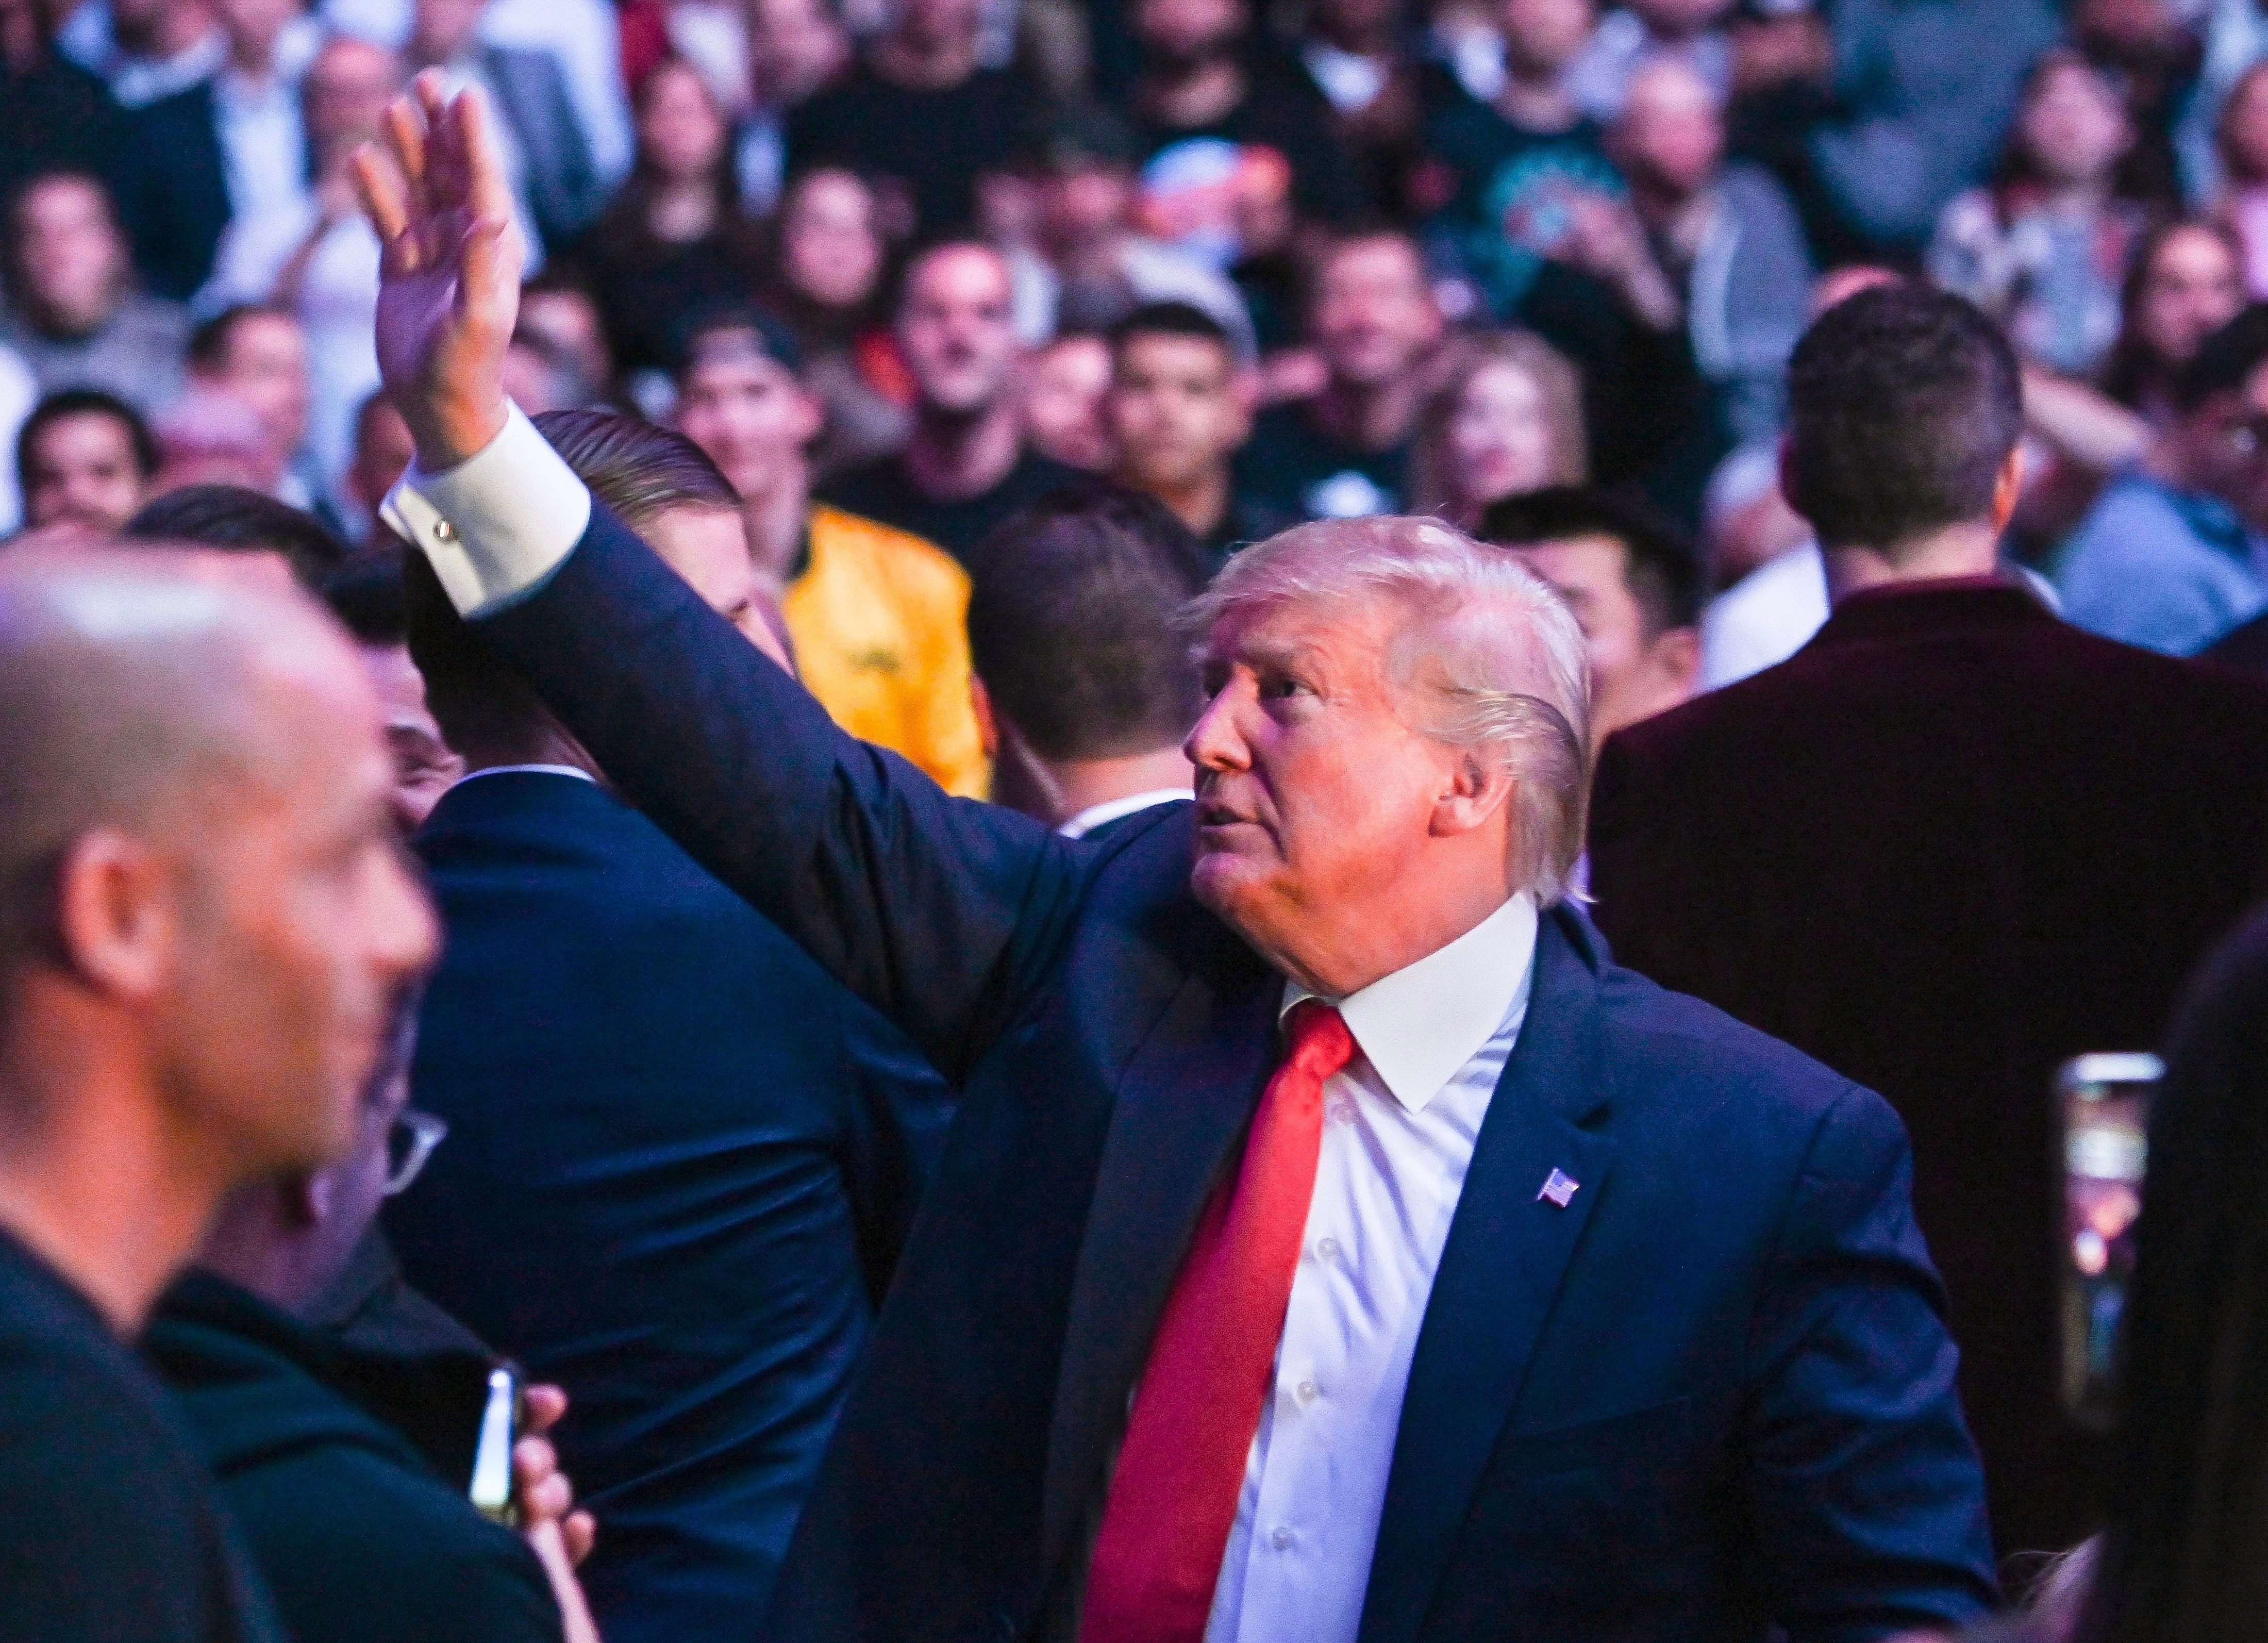 Donald Trump waves to supporters at UFC fight